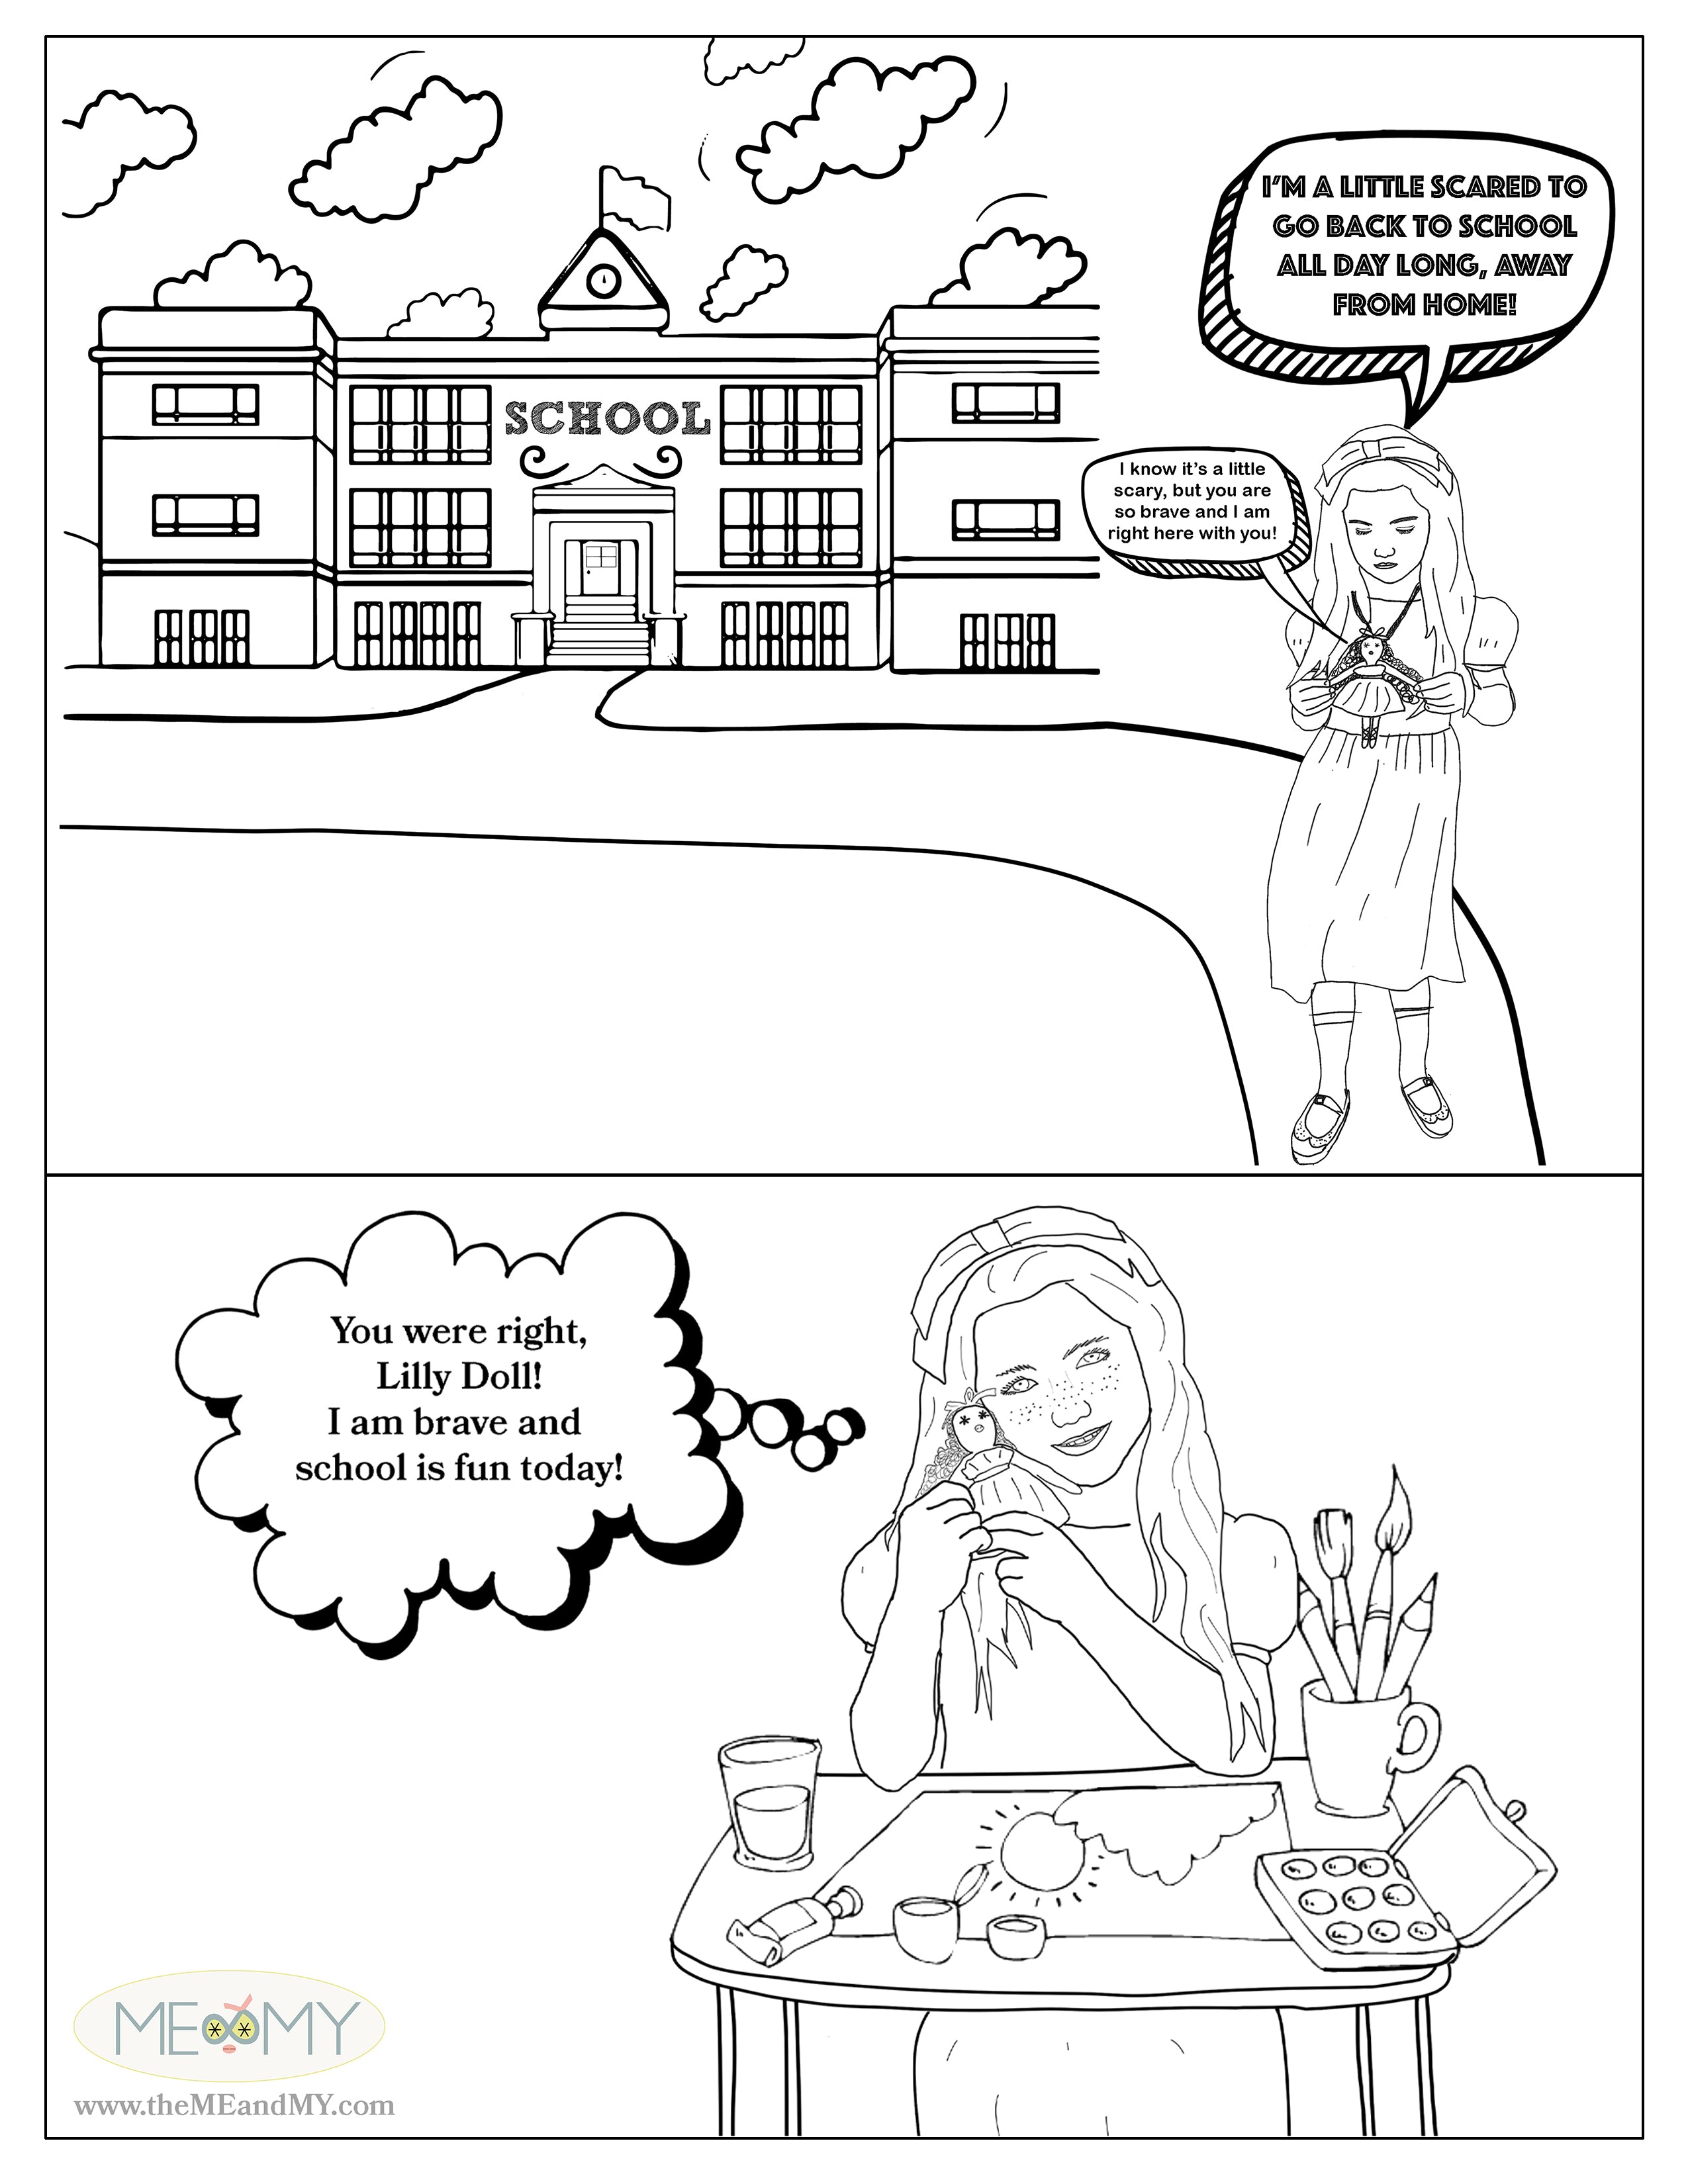 Back to School Coloring Page Download